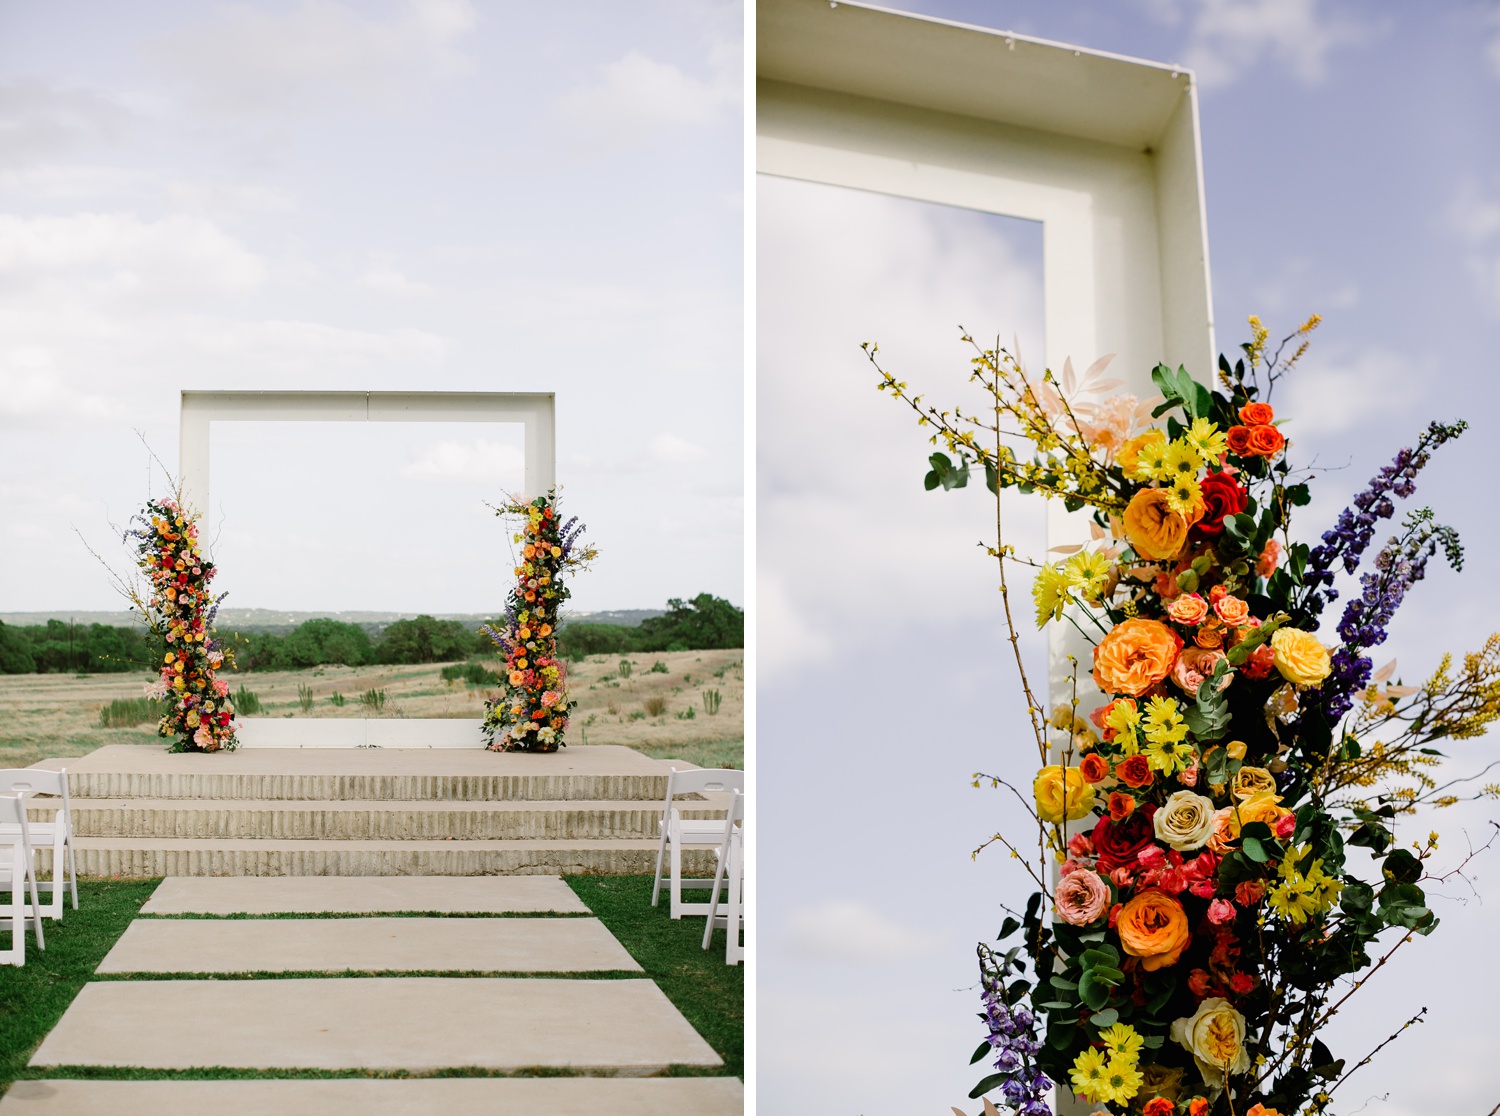 Square archway with orange, yellow, and purple florals for an outdoor wedding ceremony